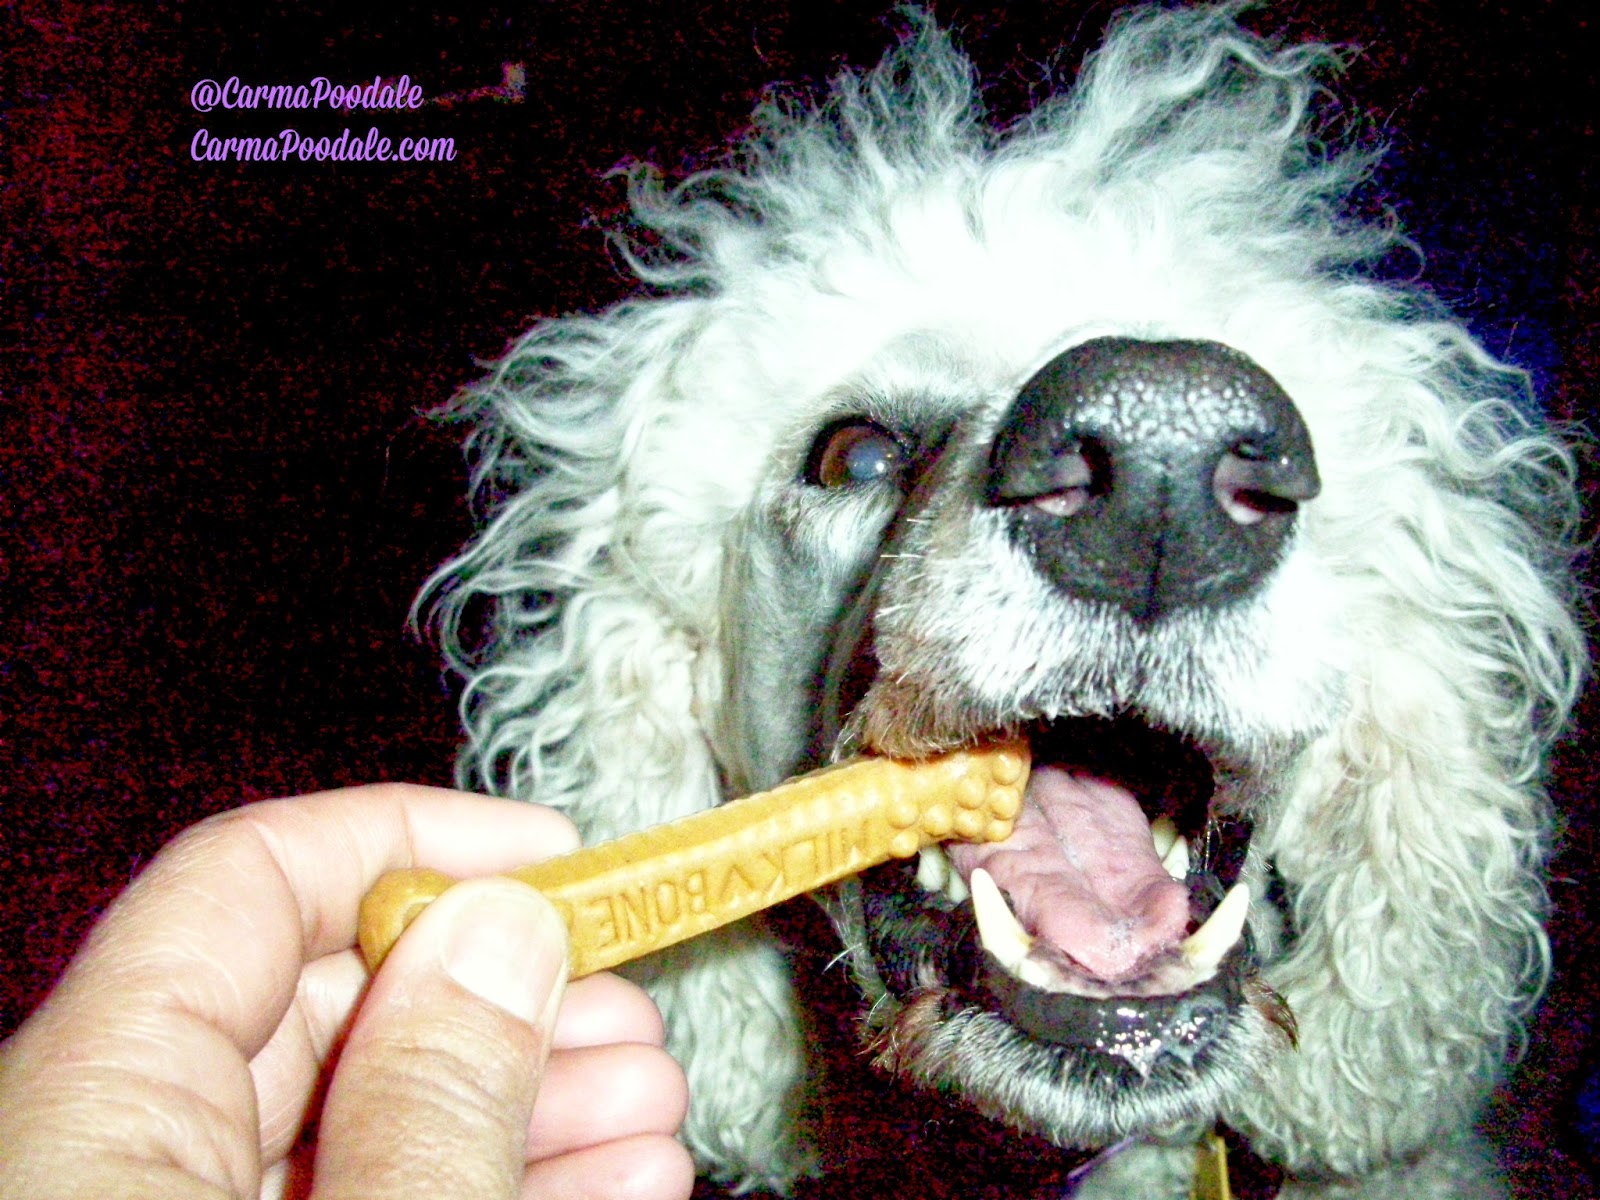 Giving treat to a dog 